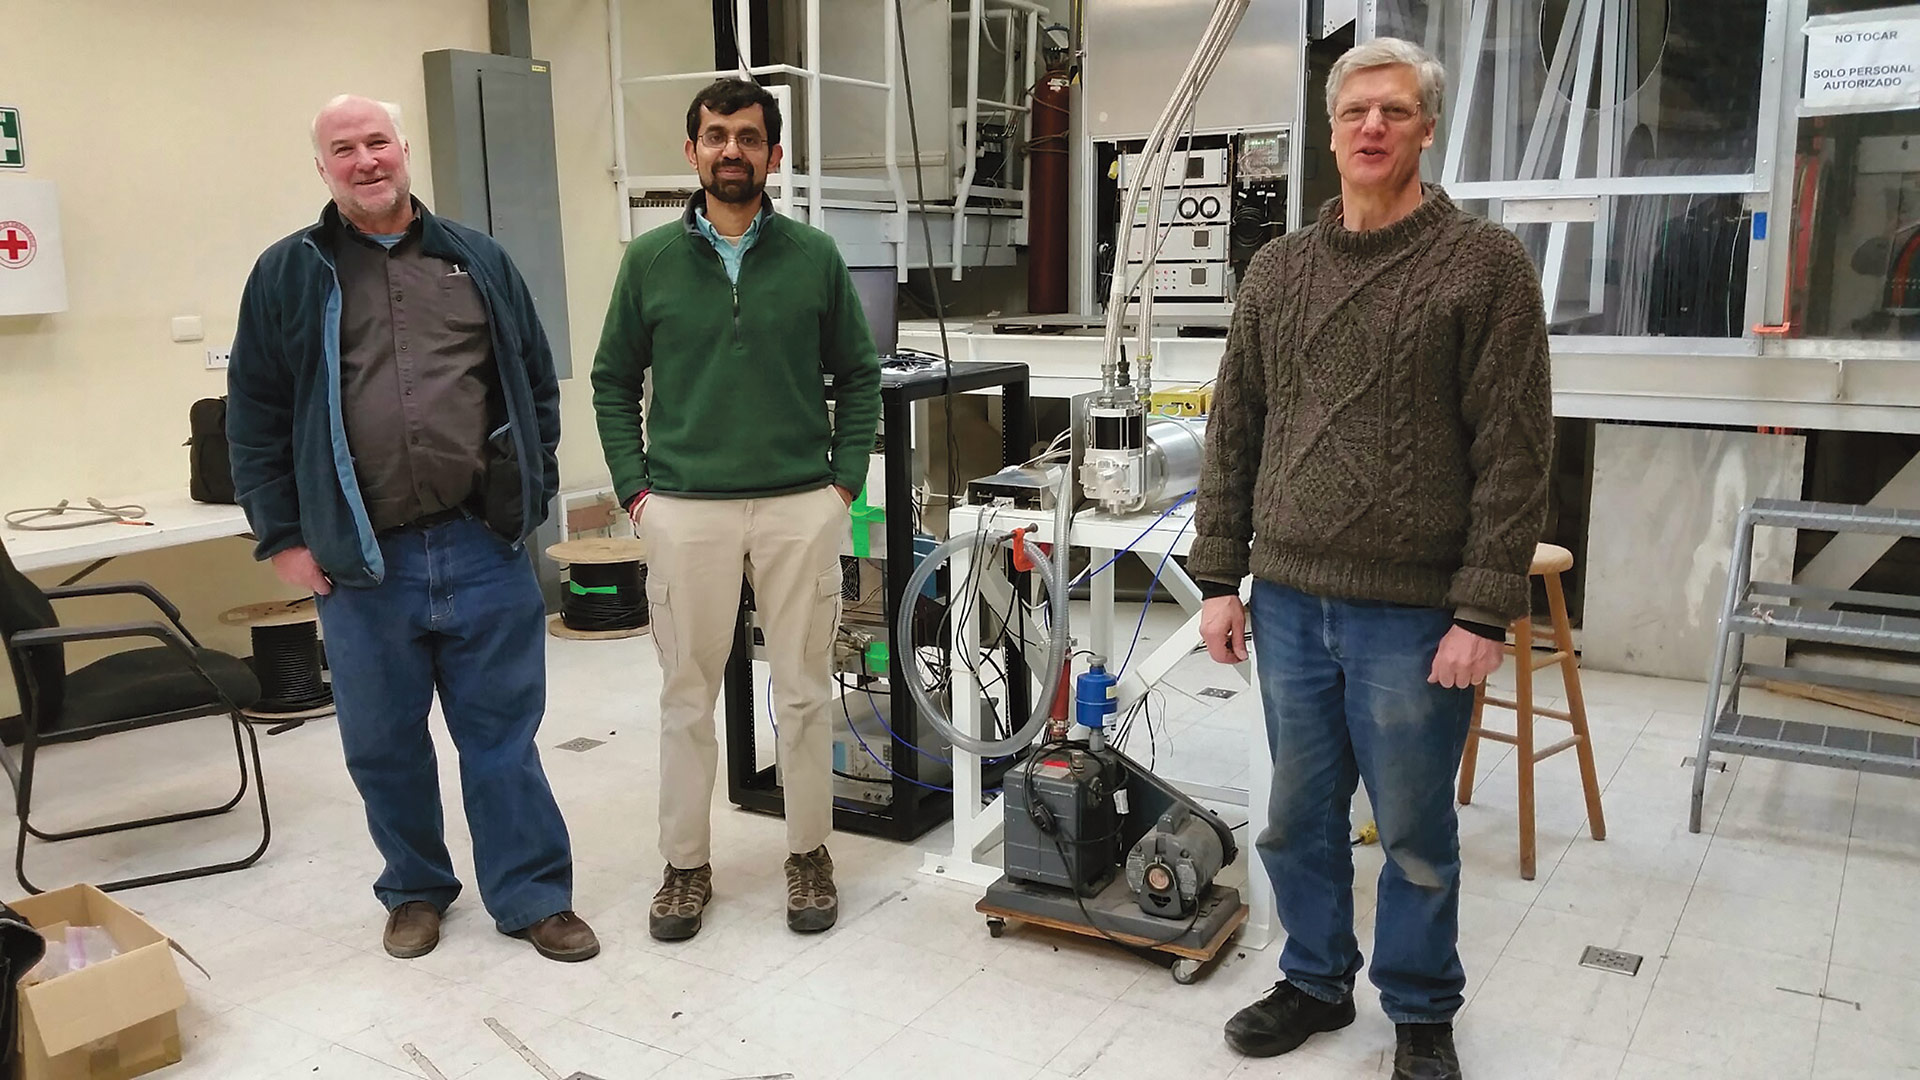 The engineering team responsible for building the 1-millimeter receiver that was installed on the LMT and used for the EHT campaign